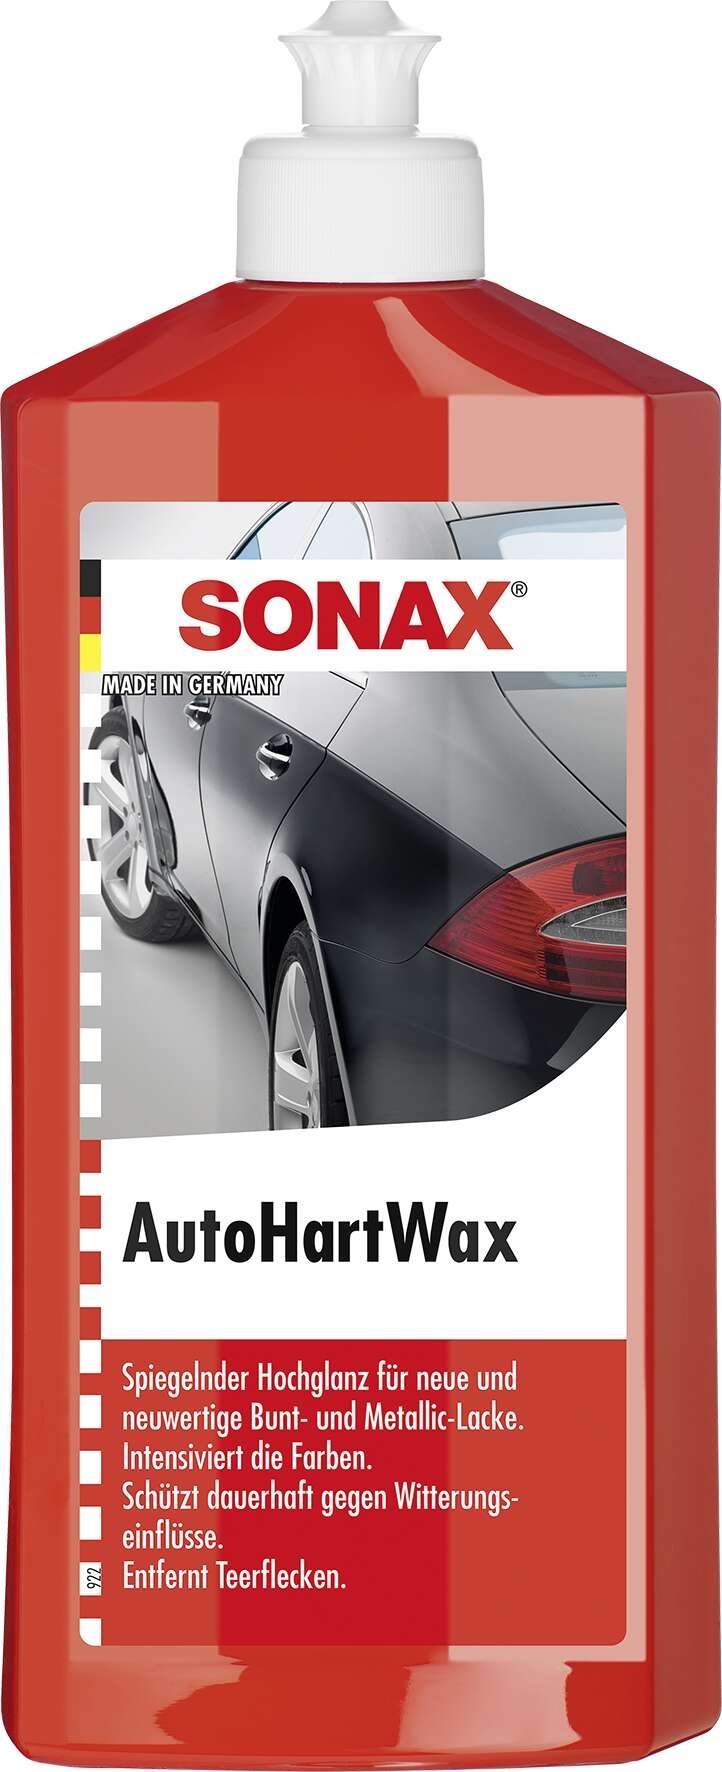 SONAX AutoHartWax 500 ml removes tar stains